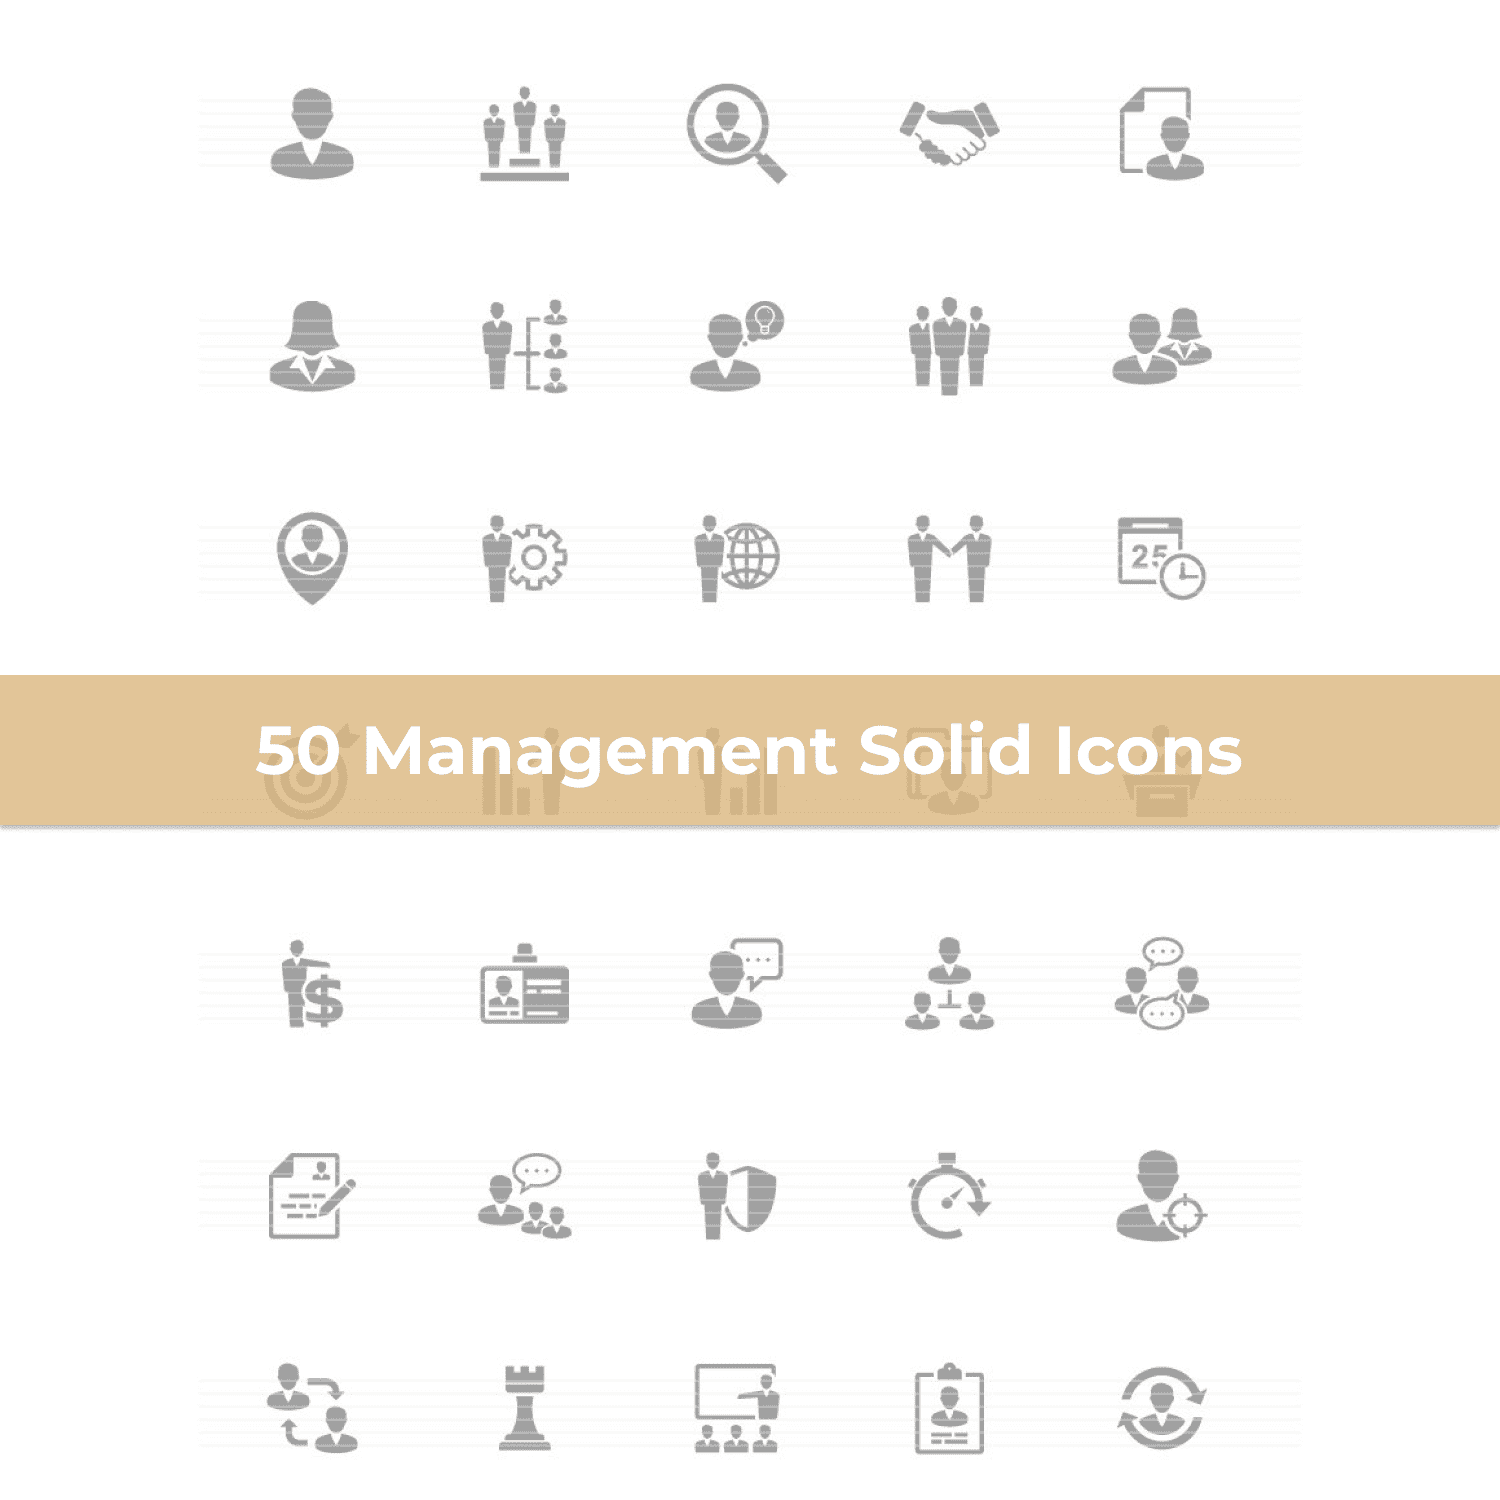 50 Management Solid Icons cover image.